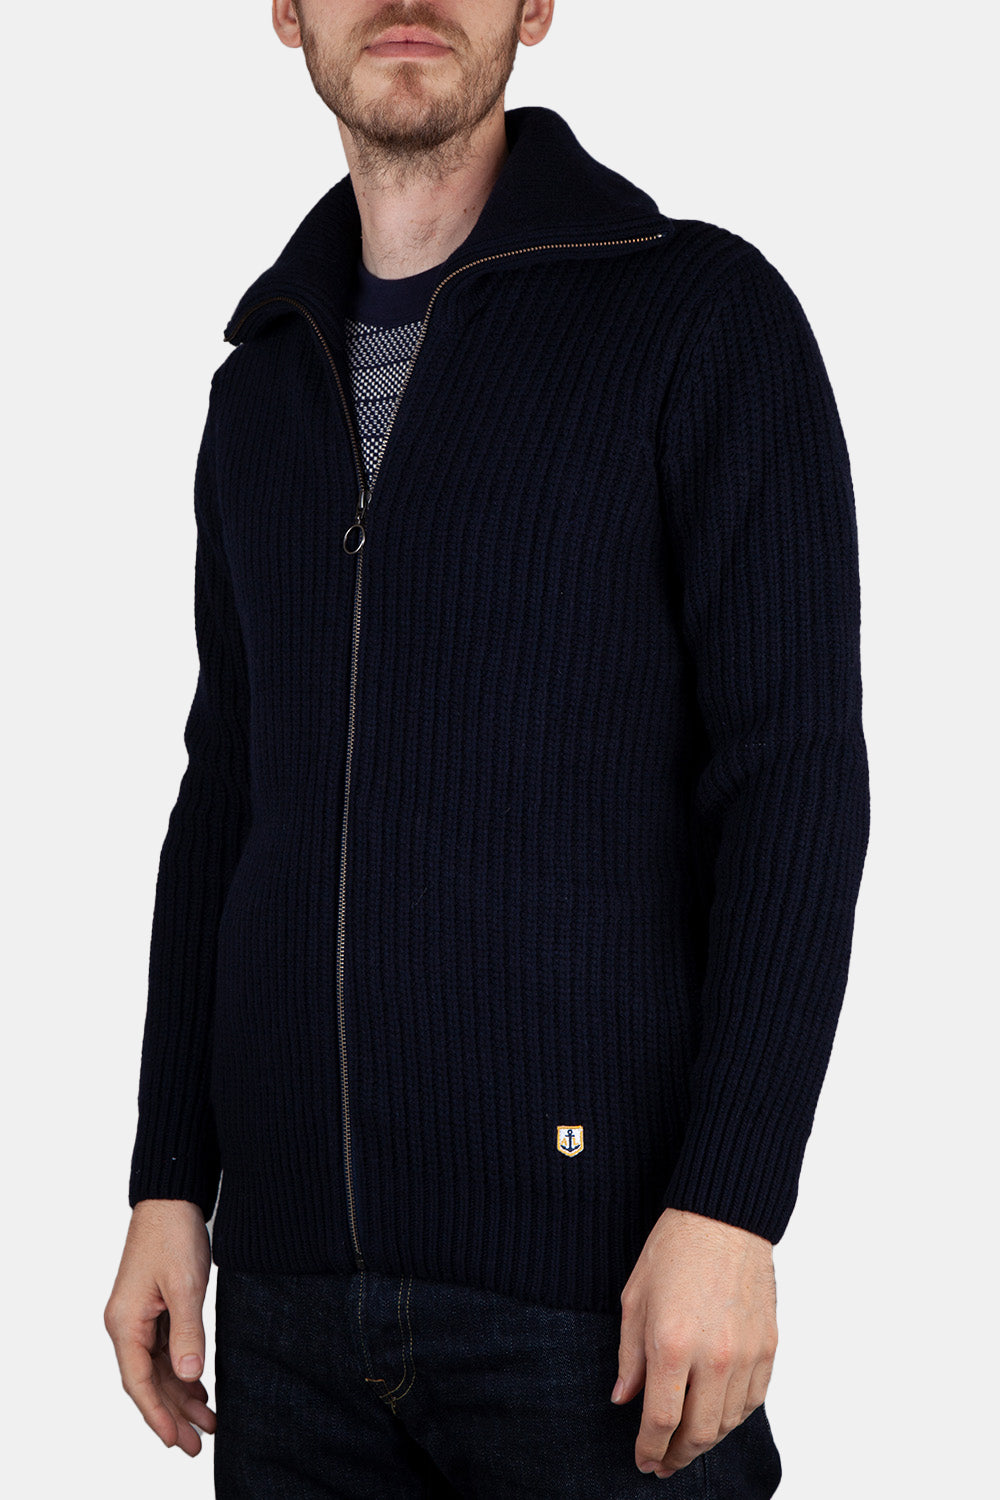 Armor Lux 2x2 Ribbed Zipped Knit (Navy)